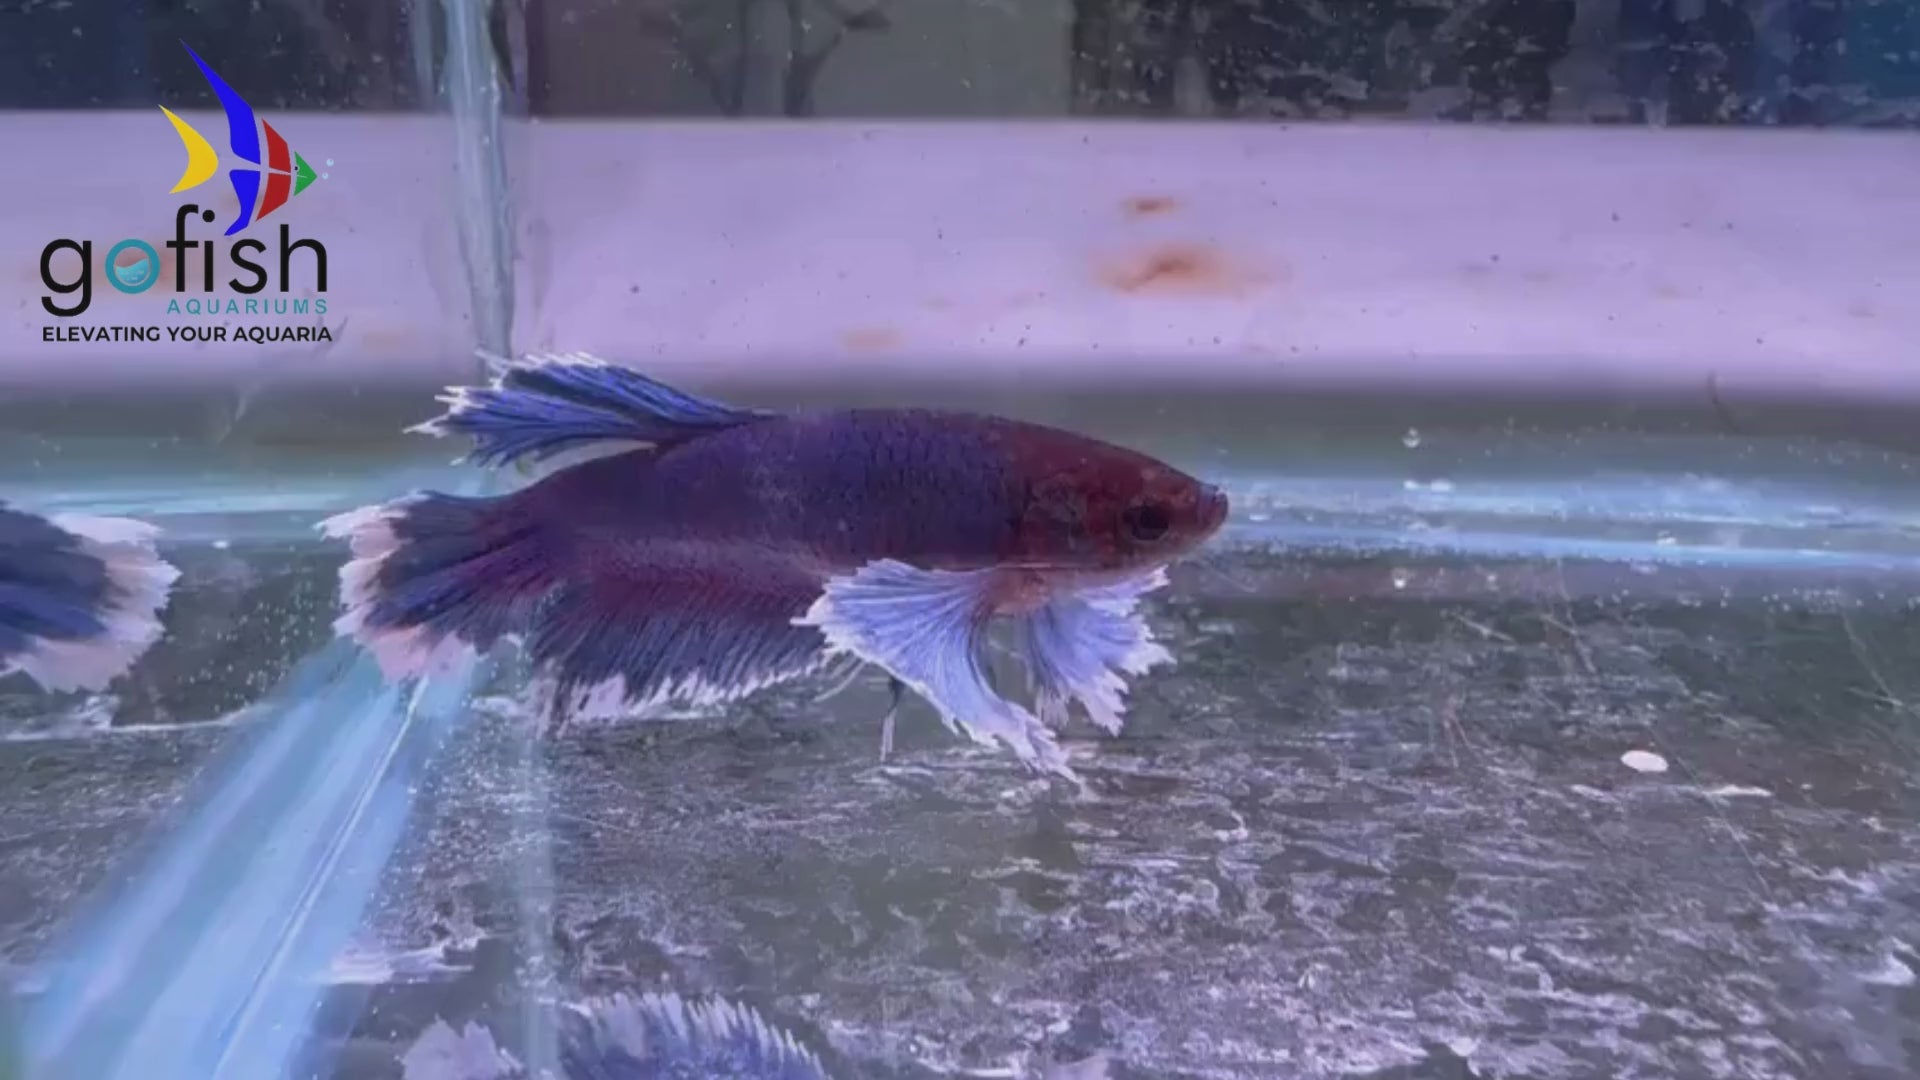 Add a Halfmoon betta to your collection.